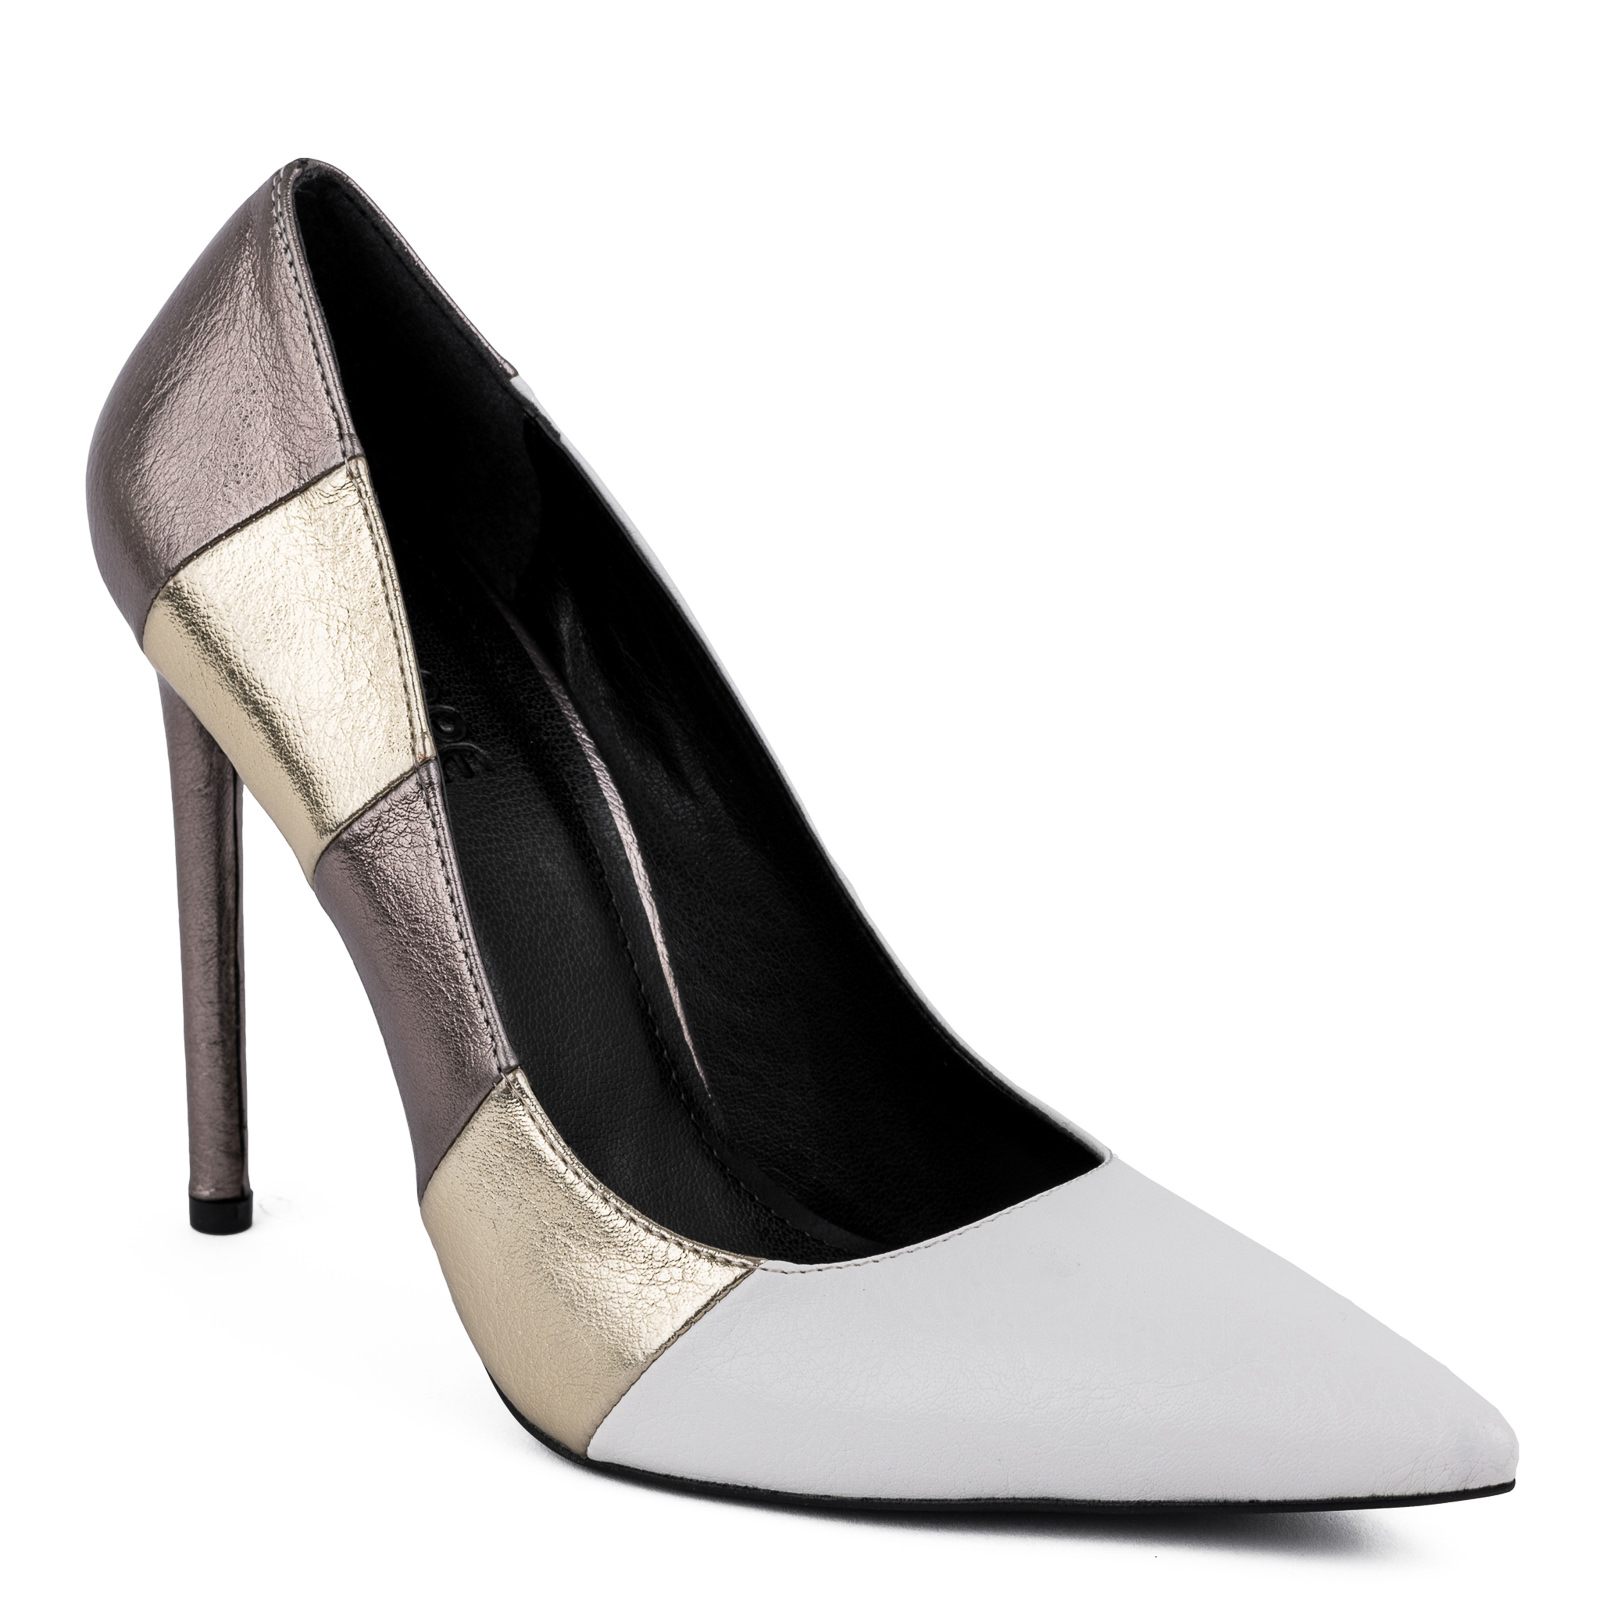 POINTED STILETTO SHOES WITH THIN HEEL - WHITE/GRAPHITE/GOLD